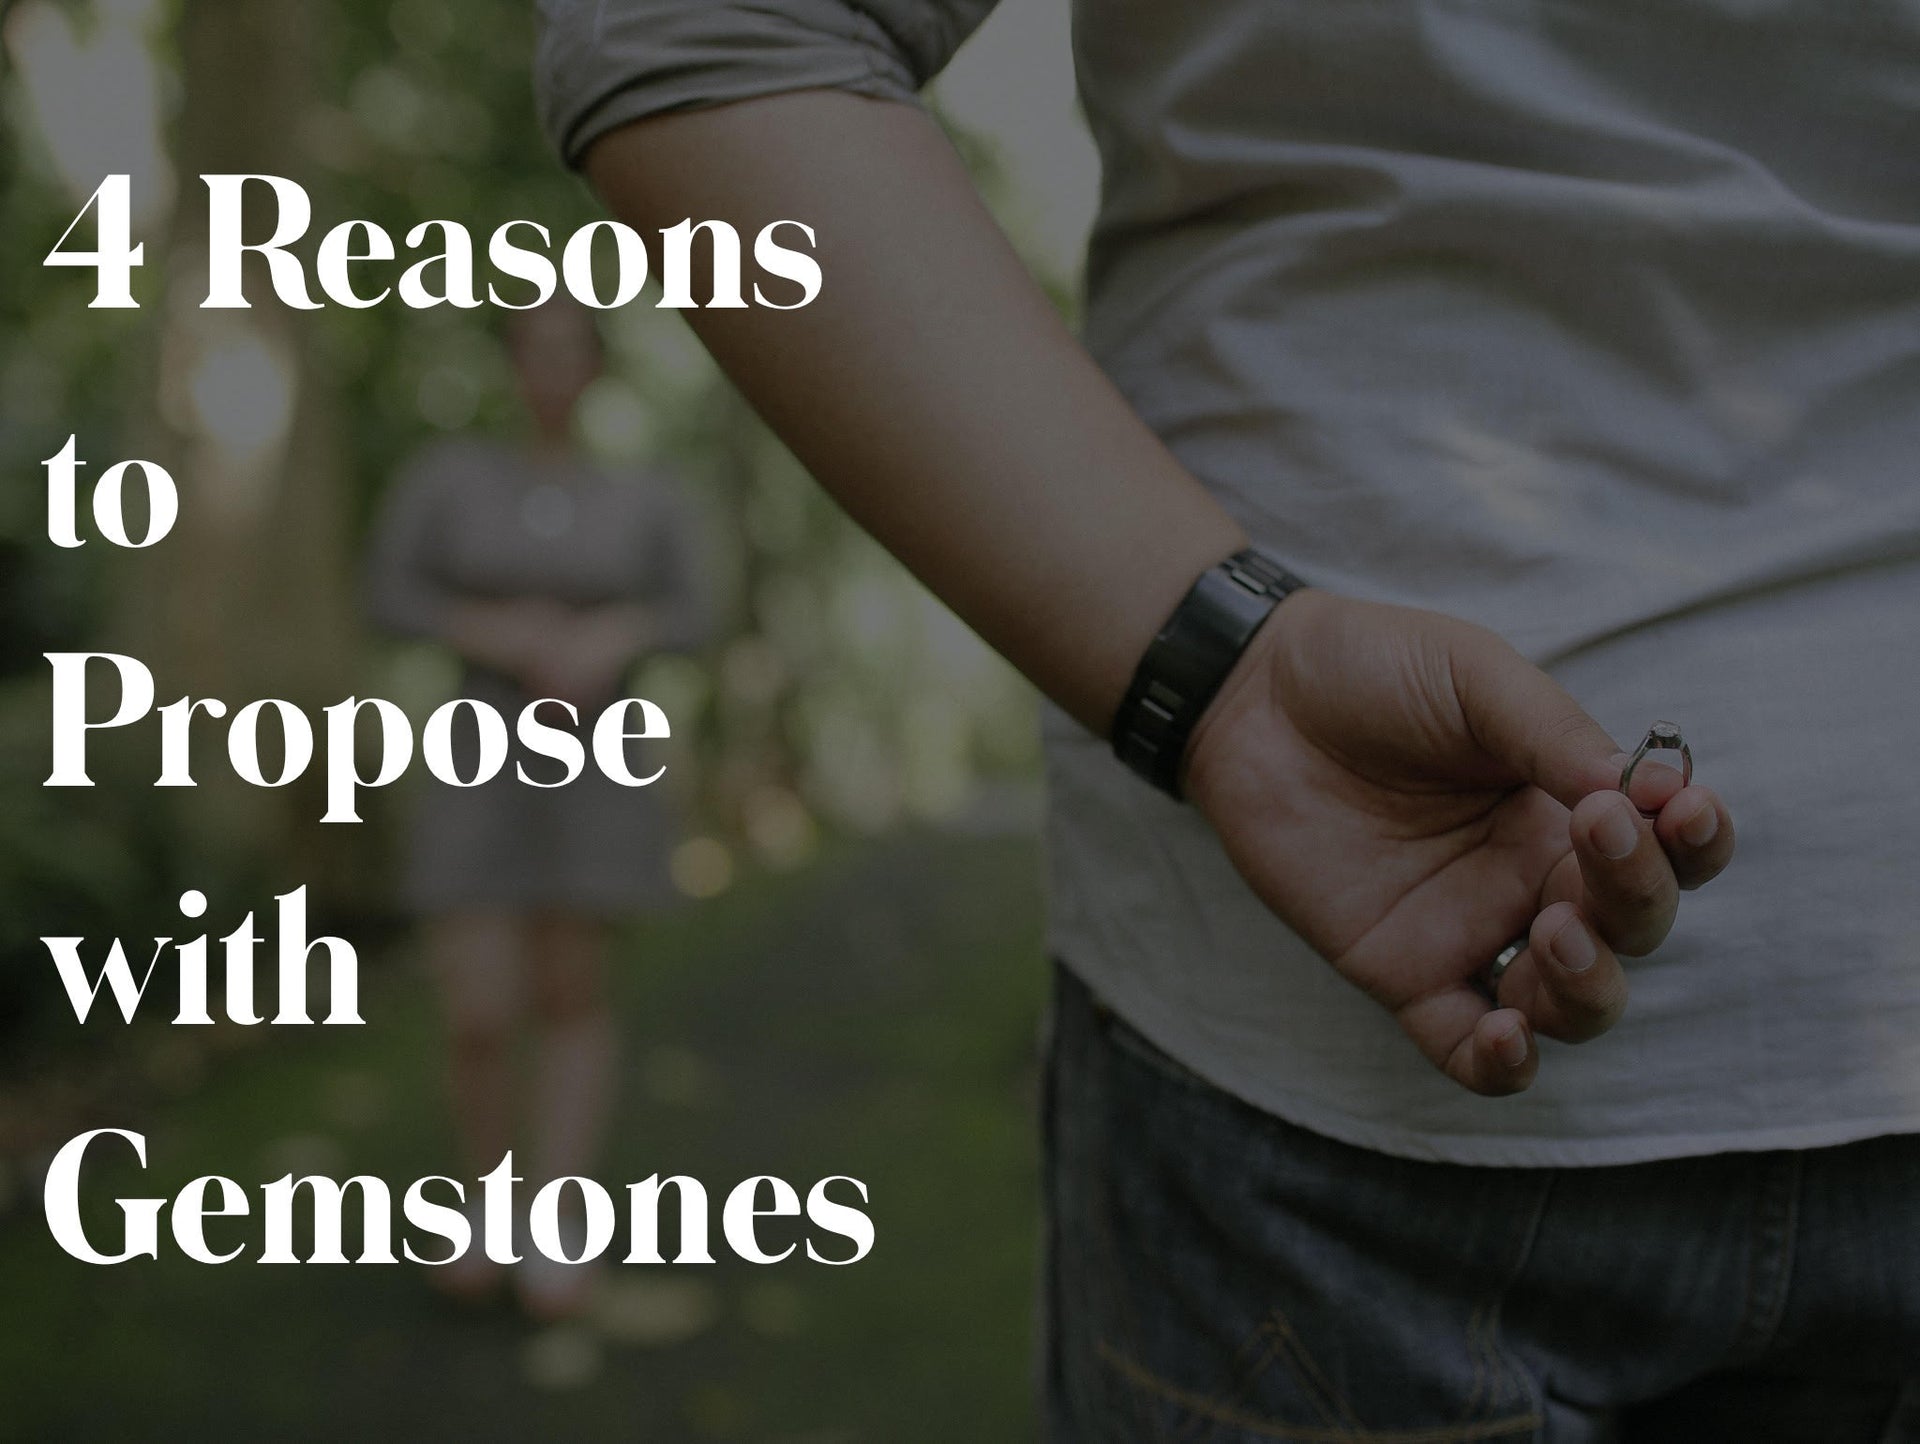 4 Reasons to Propose with Gemstones